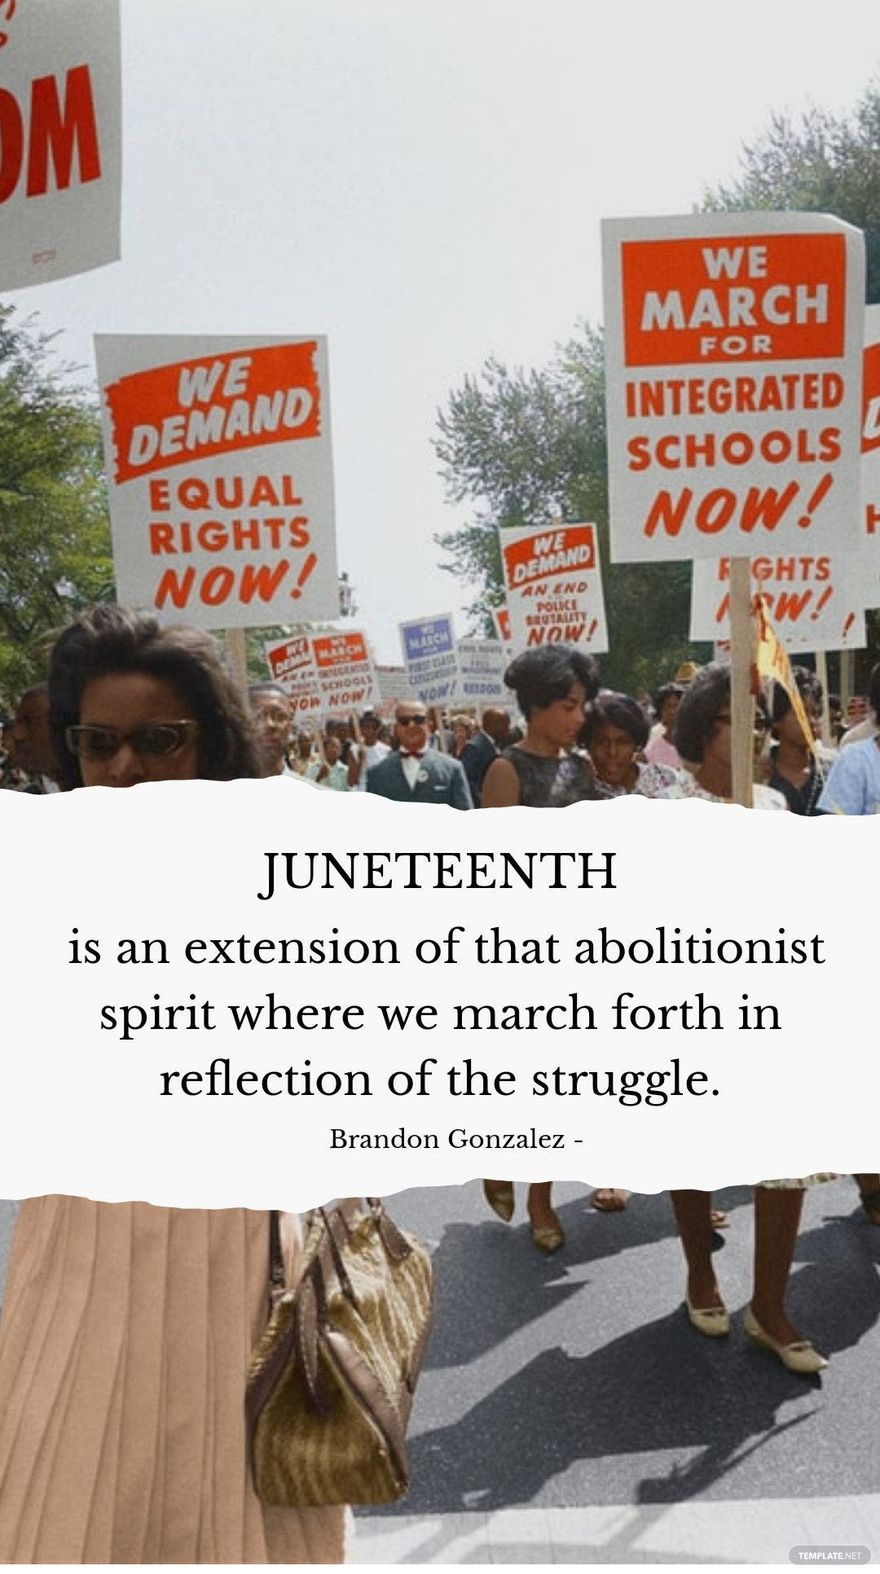 Brandon Gonzalez - Juneteenth is an extension of that abolitionist spirit where we march forth in reflection of the struggle.